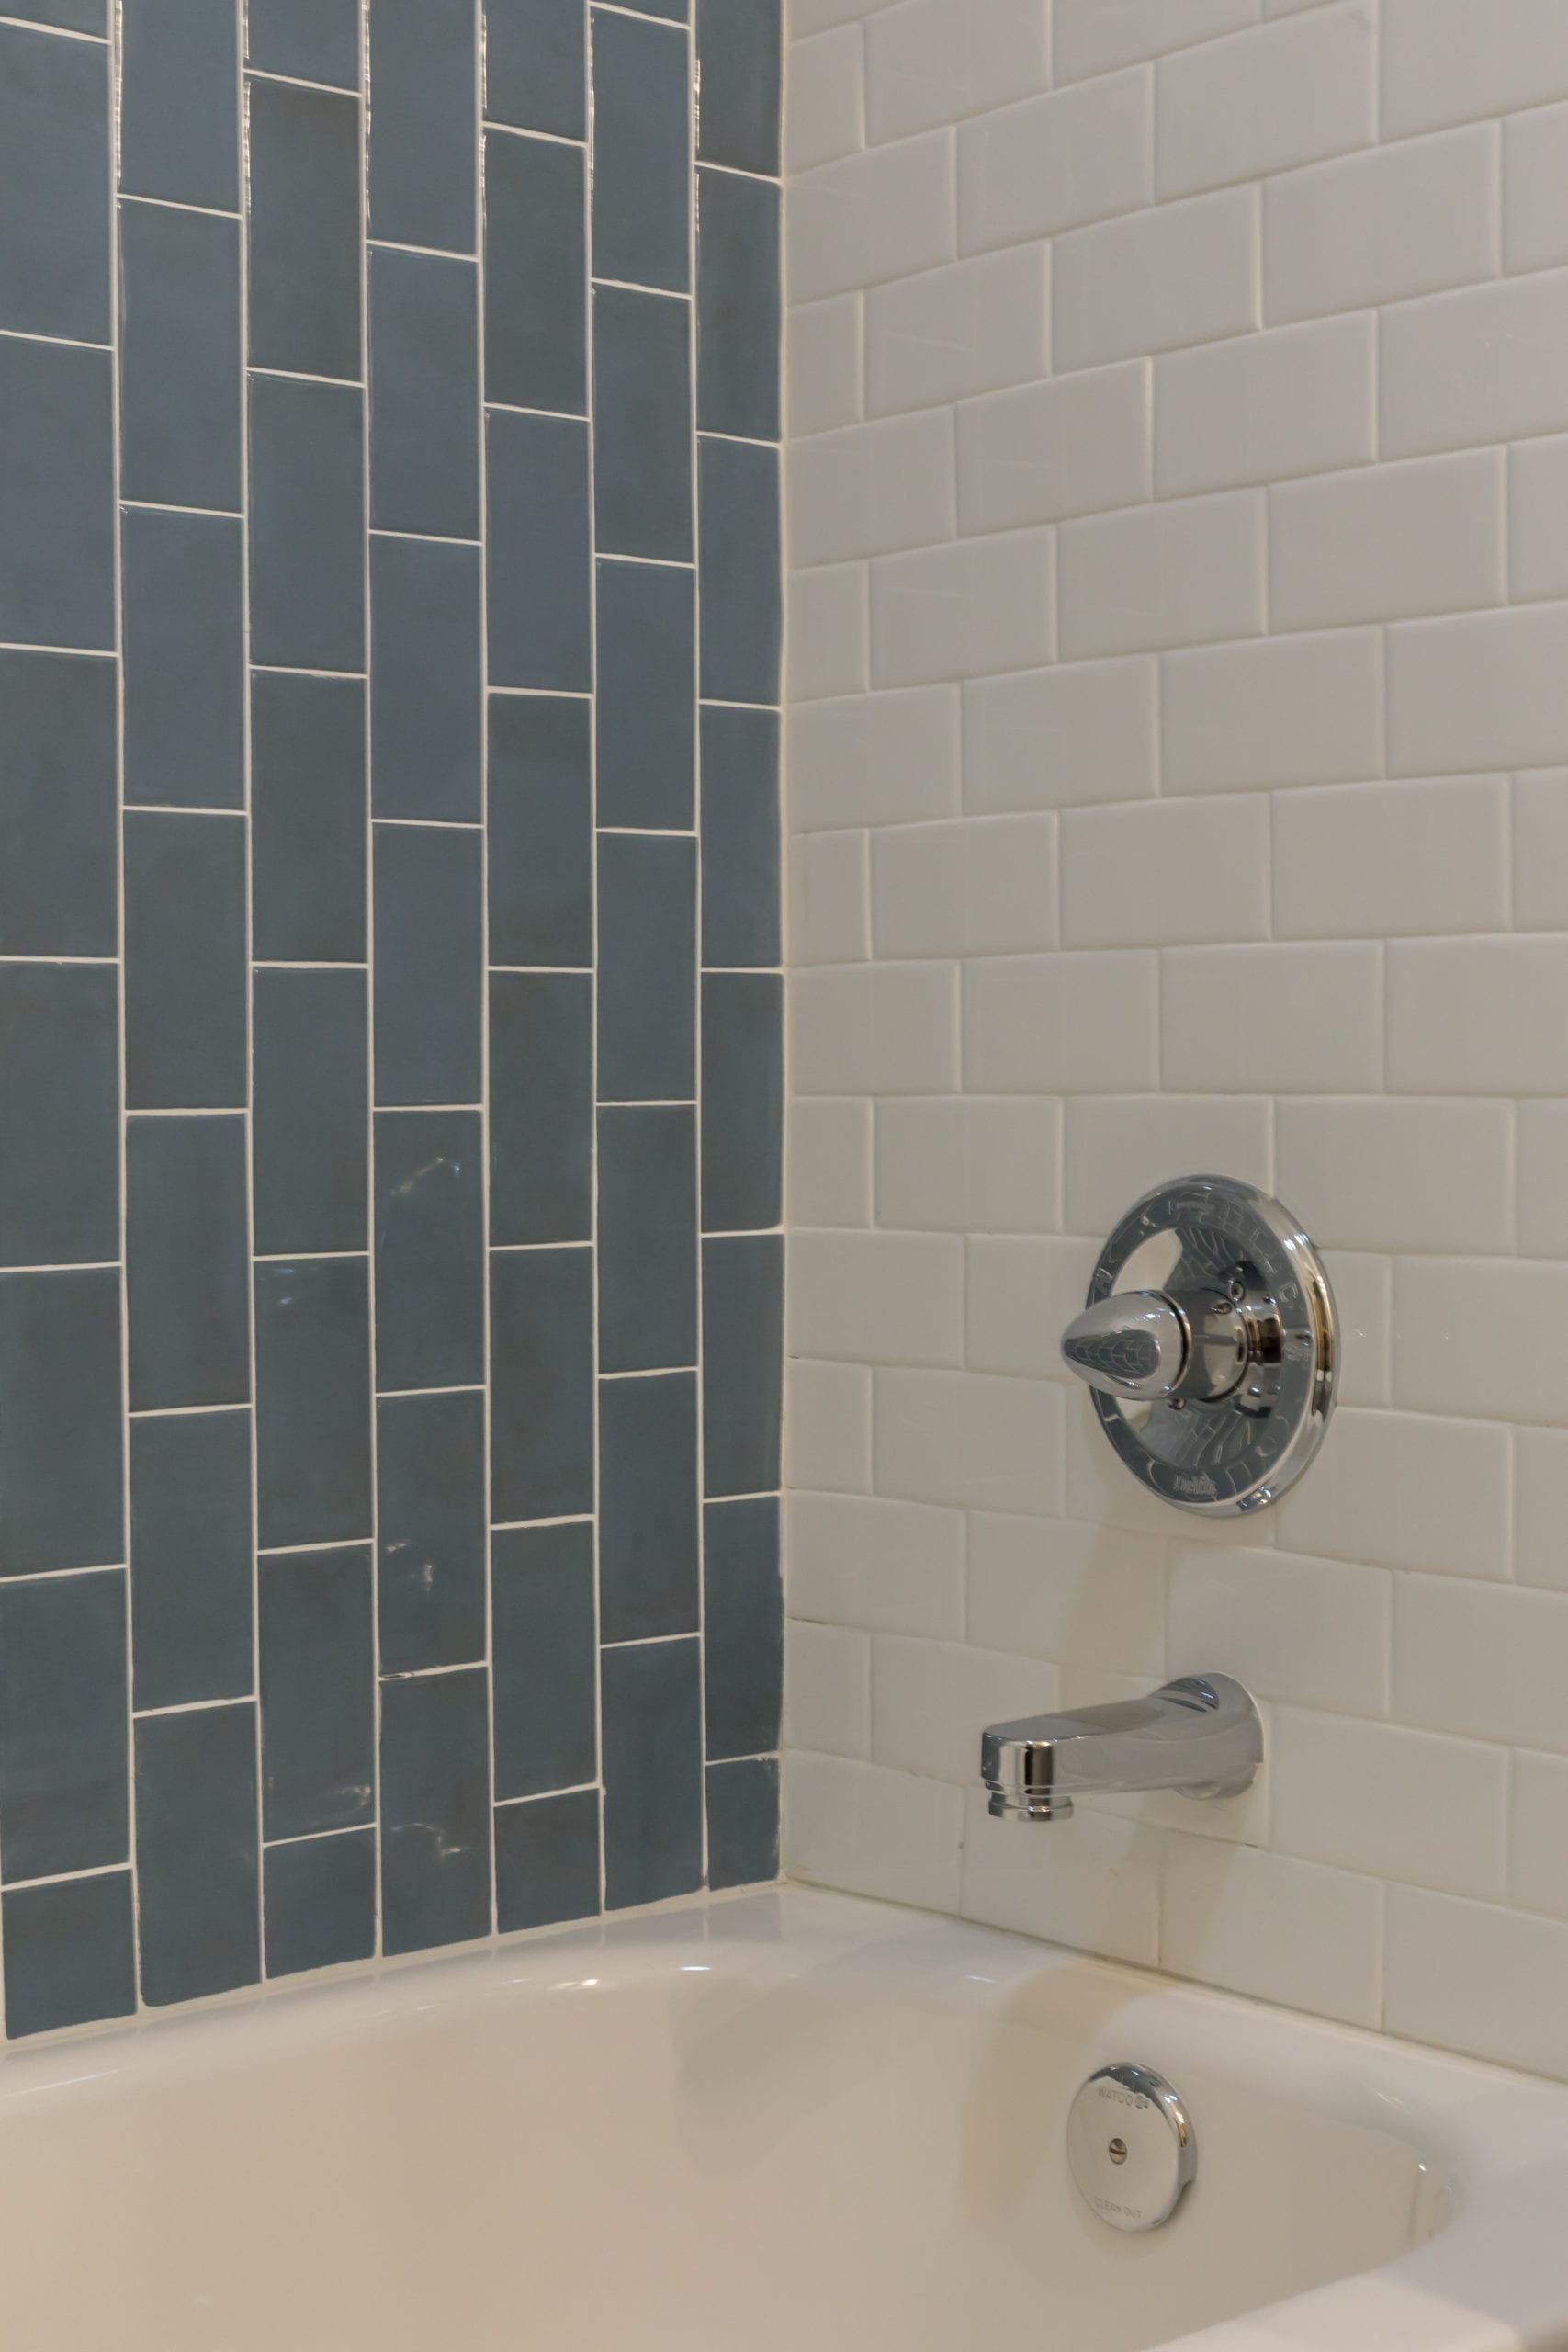 1337 New Hampshire, Shower Tile and Fixture Detail